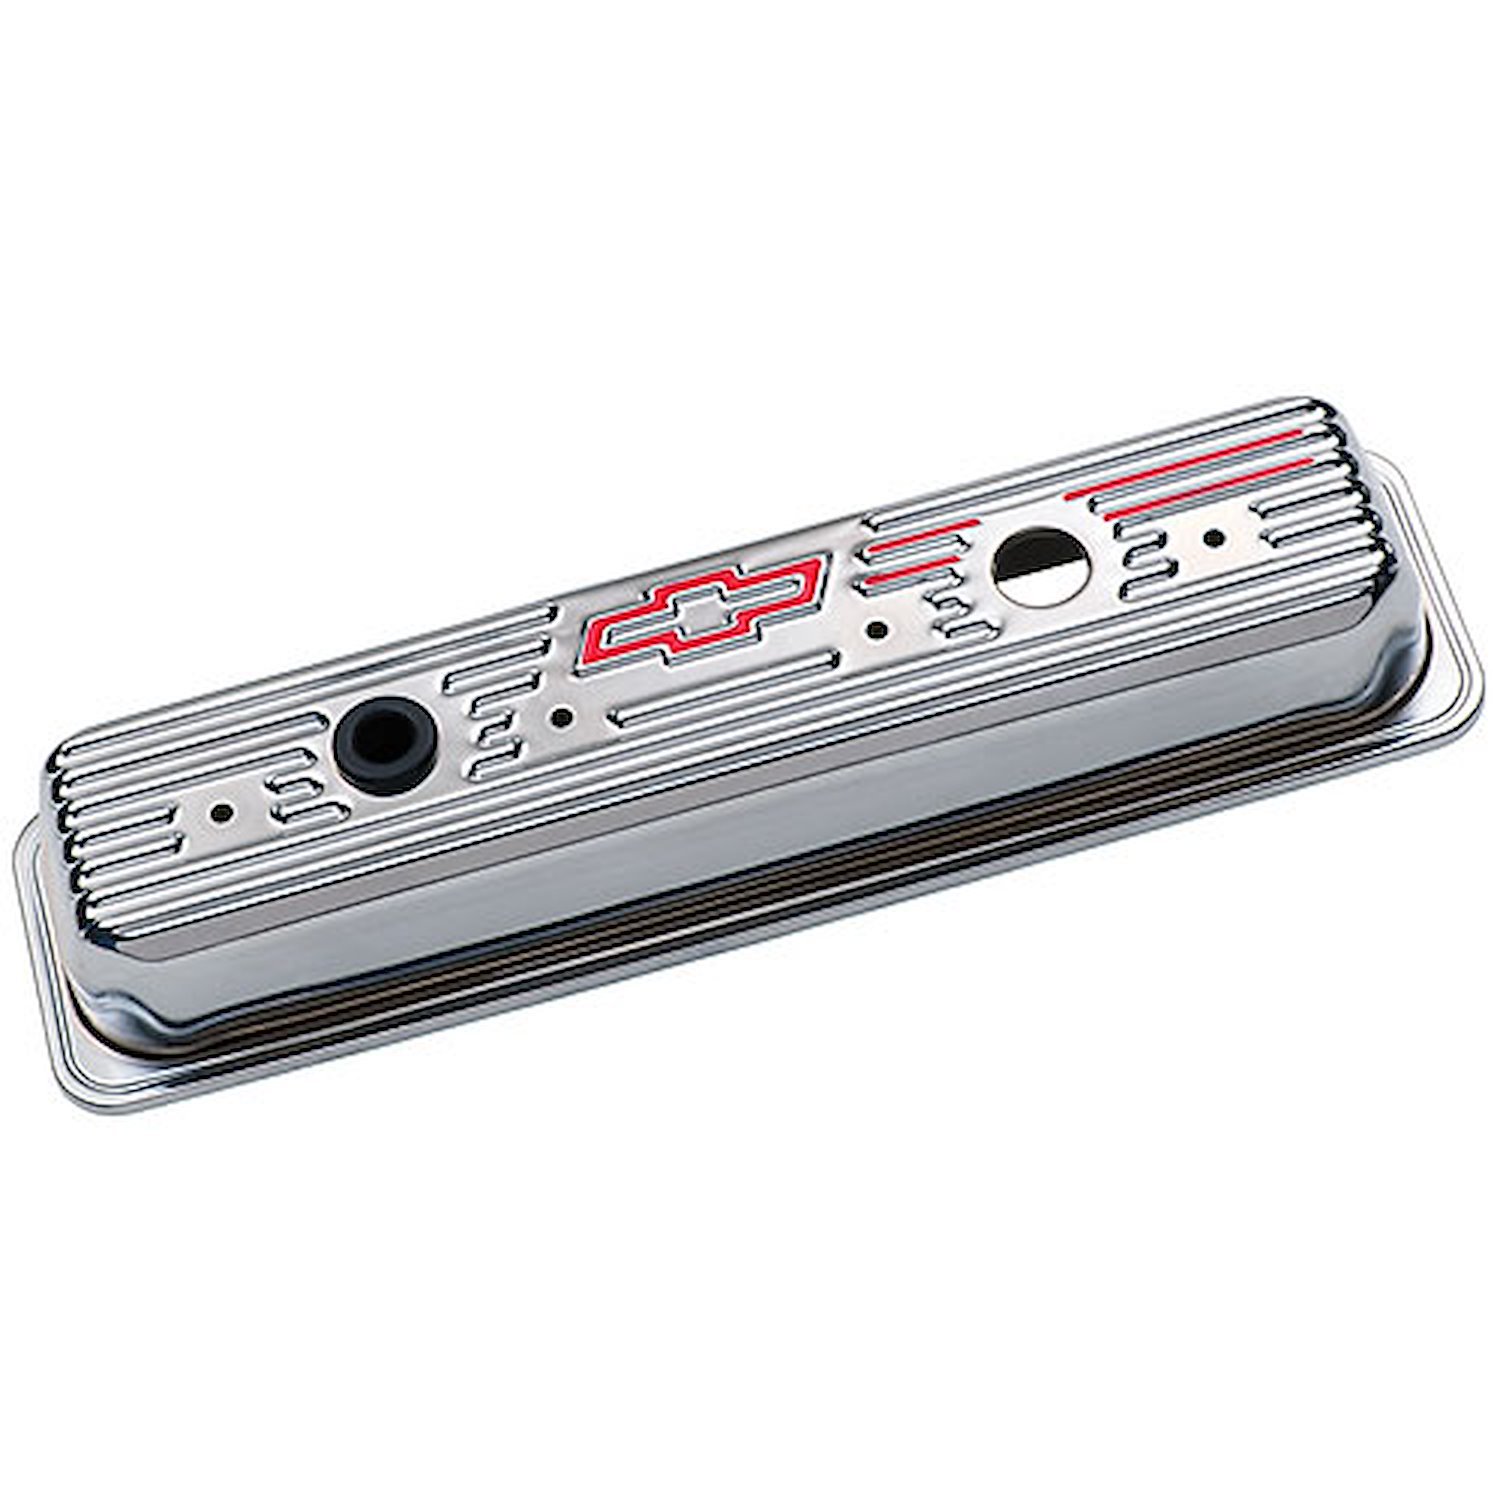 Stamped Steel Center Bolt Tall Valve Covers for 1987-Up Small Block Chevy in Chrome Finish